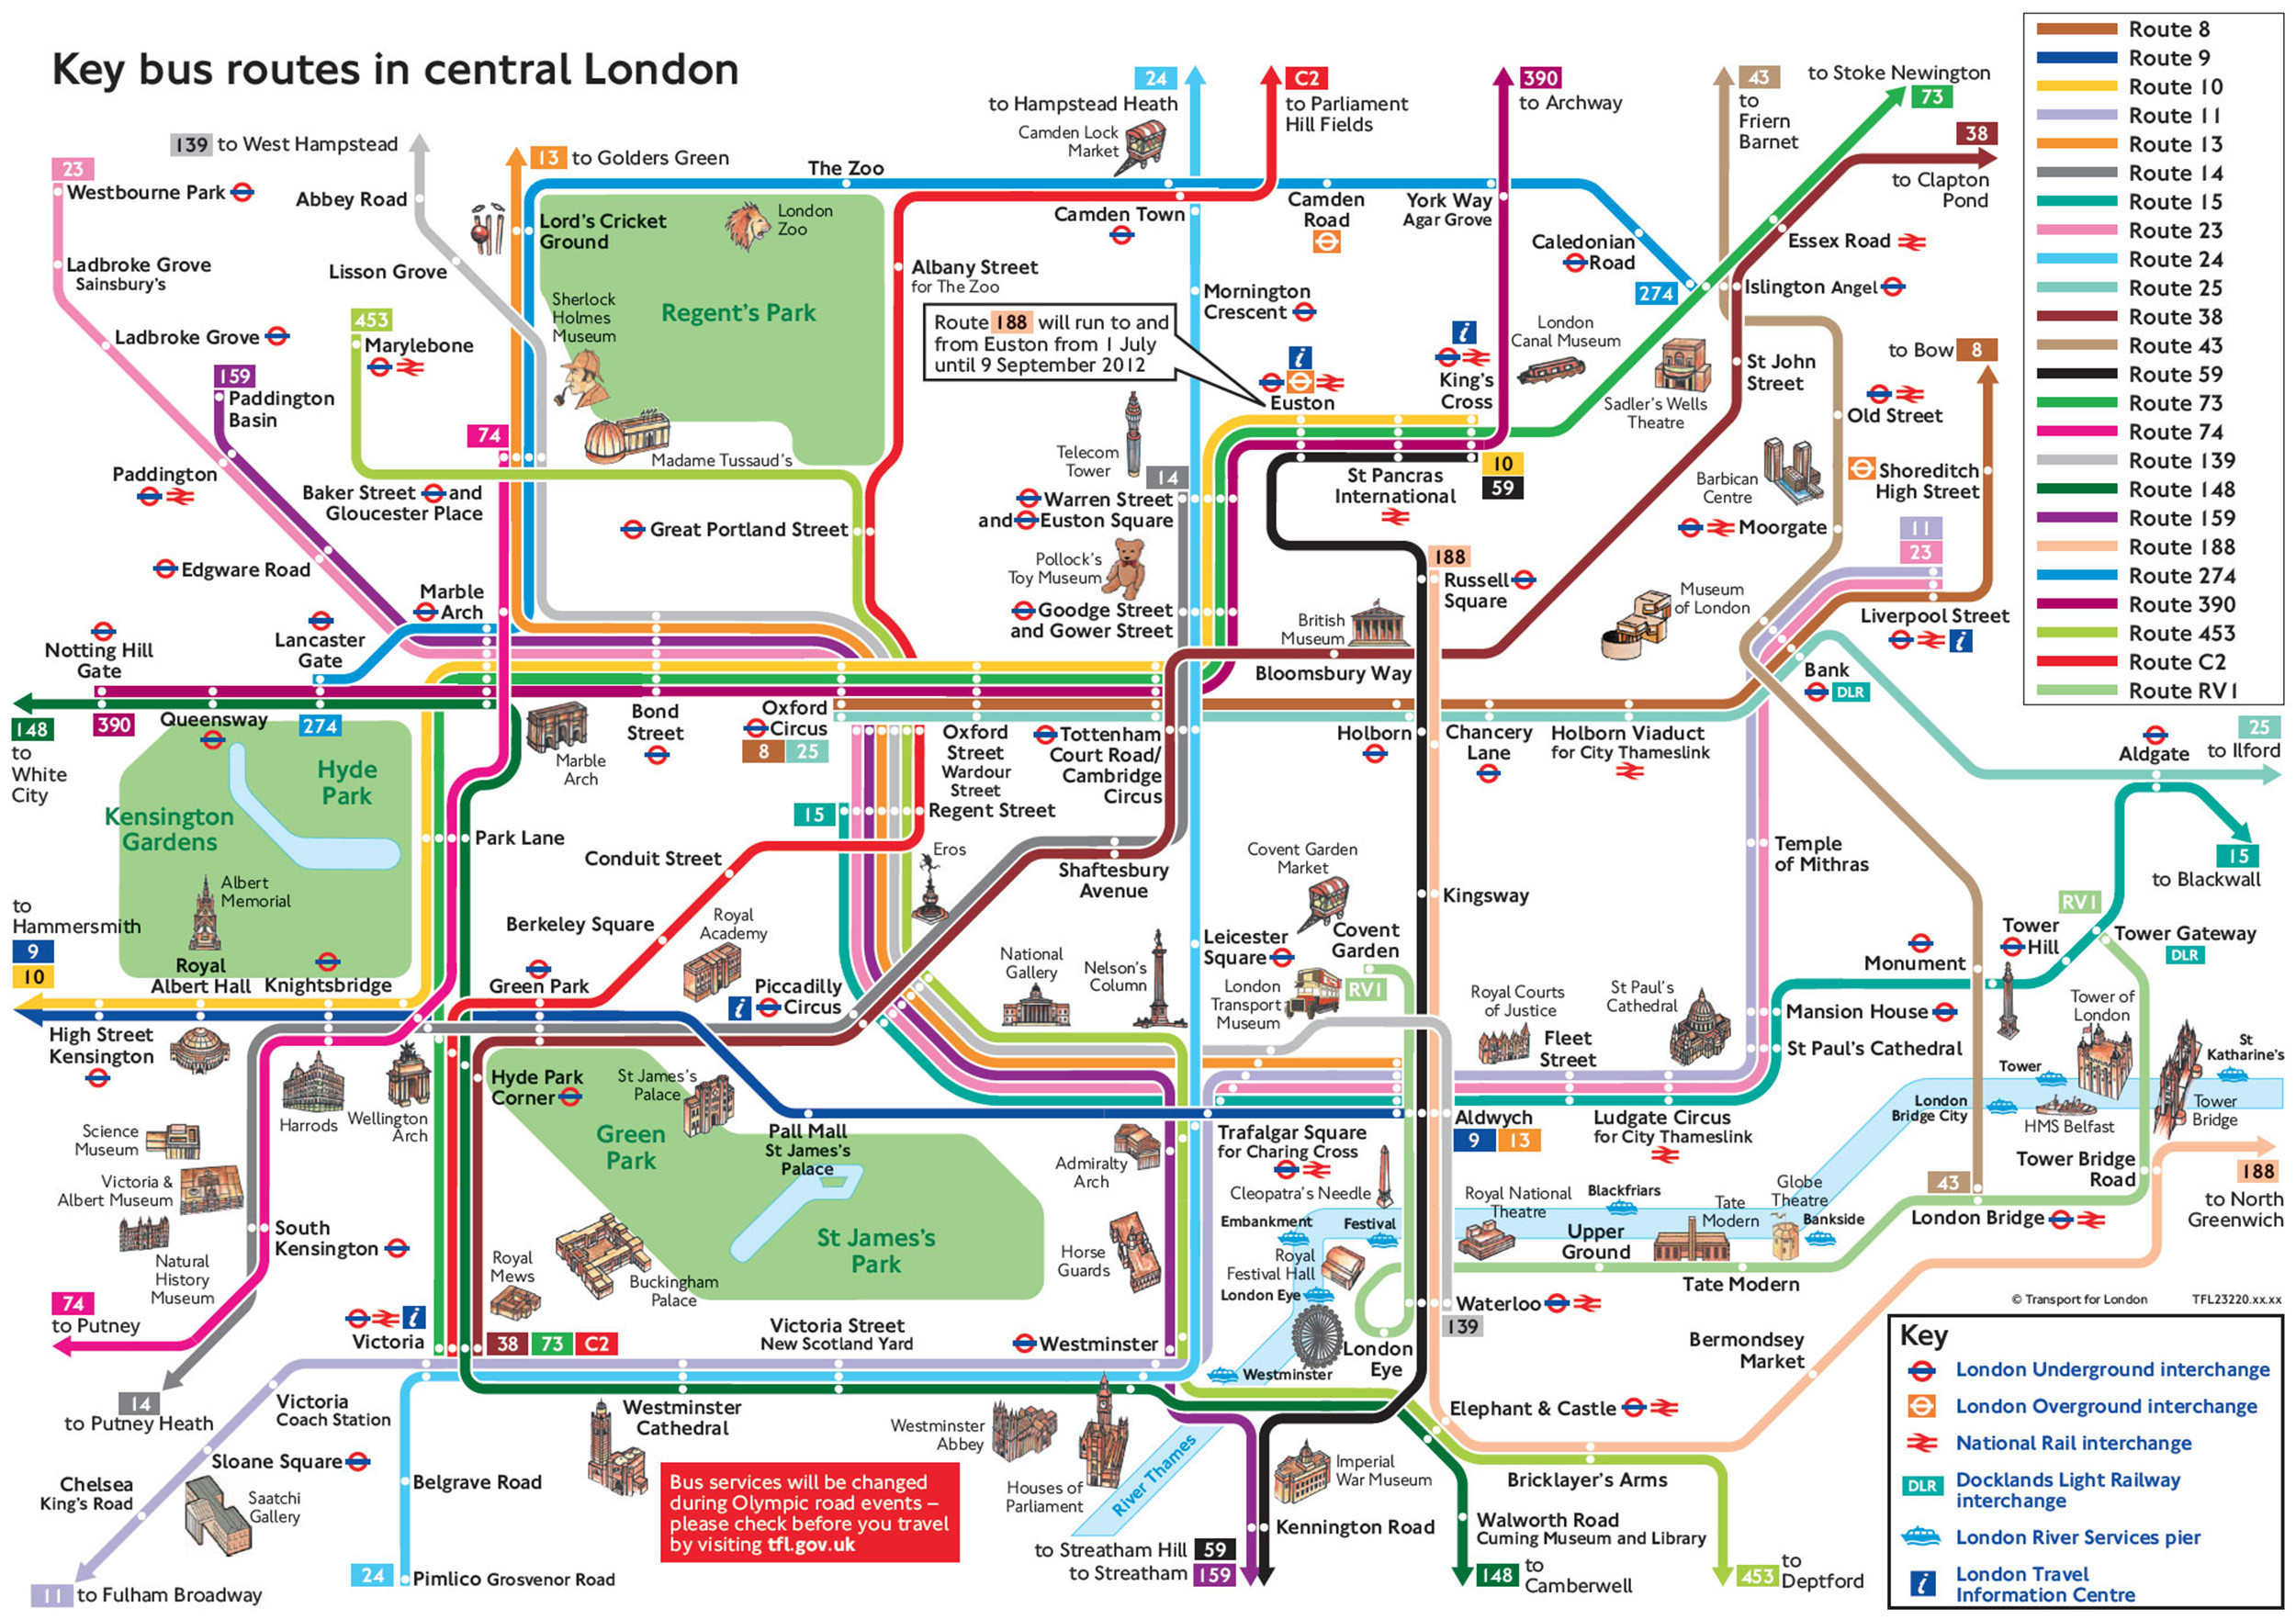 London Tube Maps and Zones 2018 | Chameleon Web Services